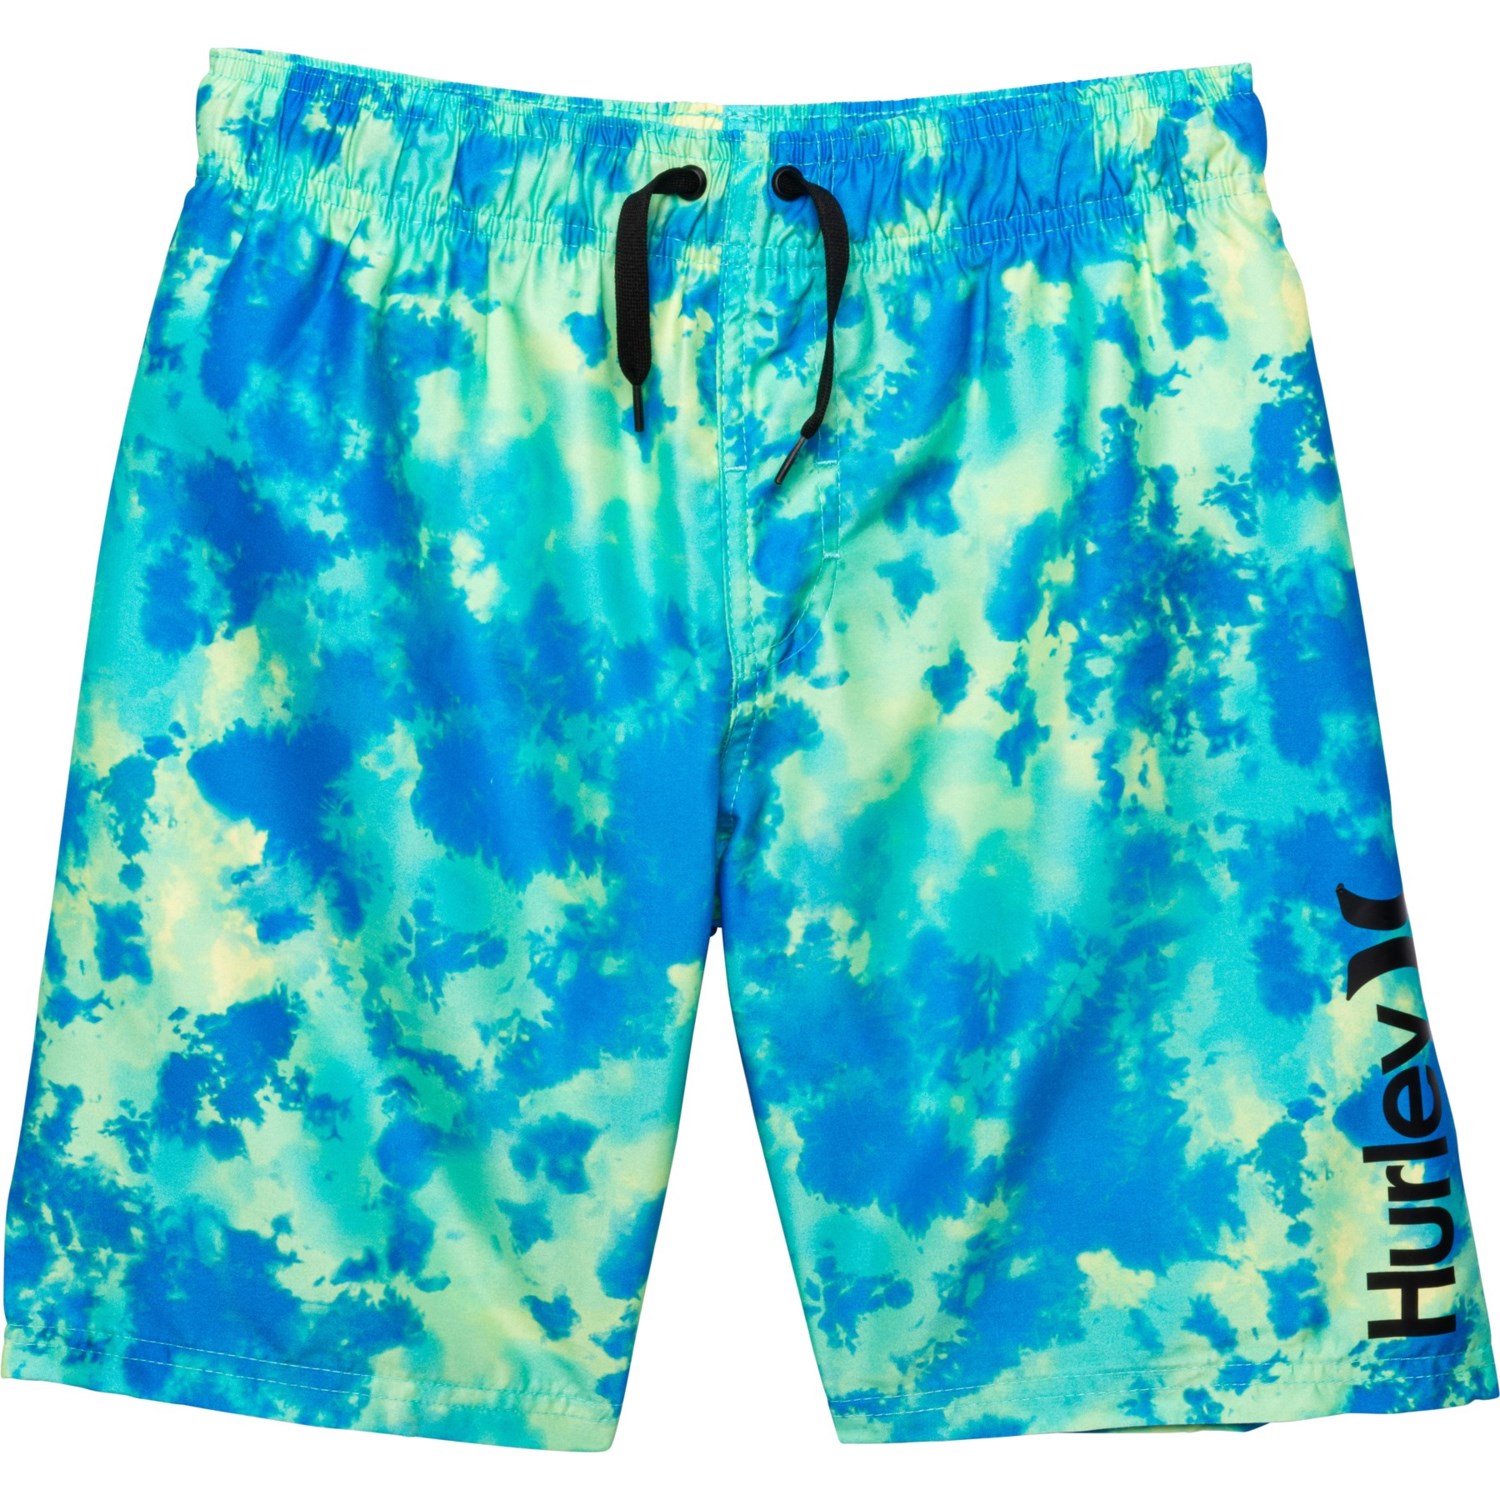 Hurley Boys' Printed Board Shorts Fast worldwide shipping Online Best ...